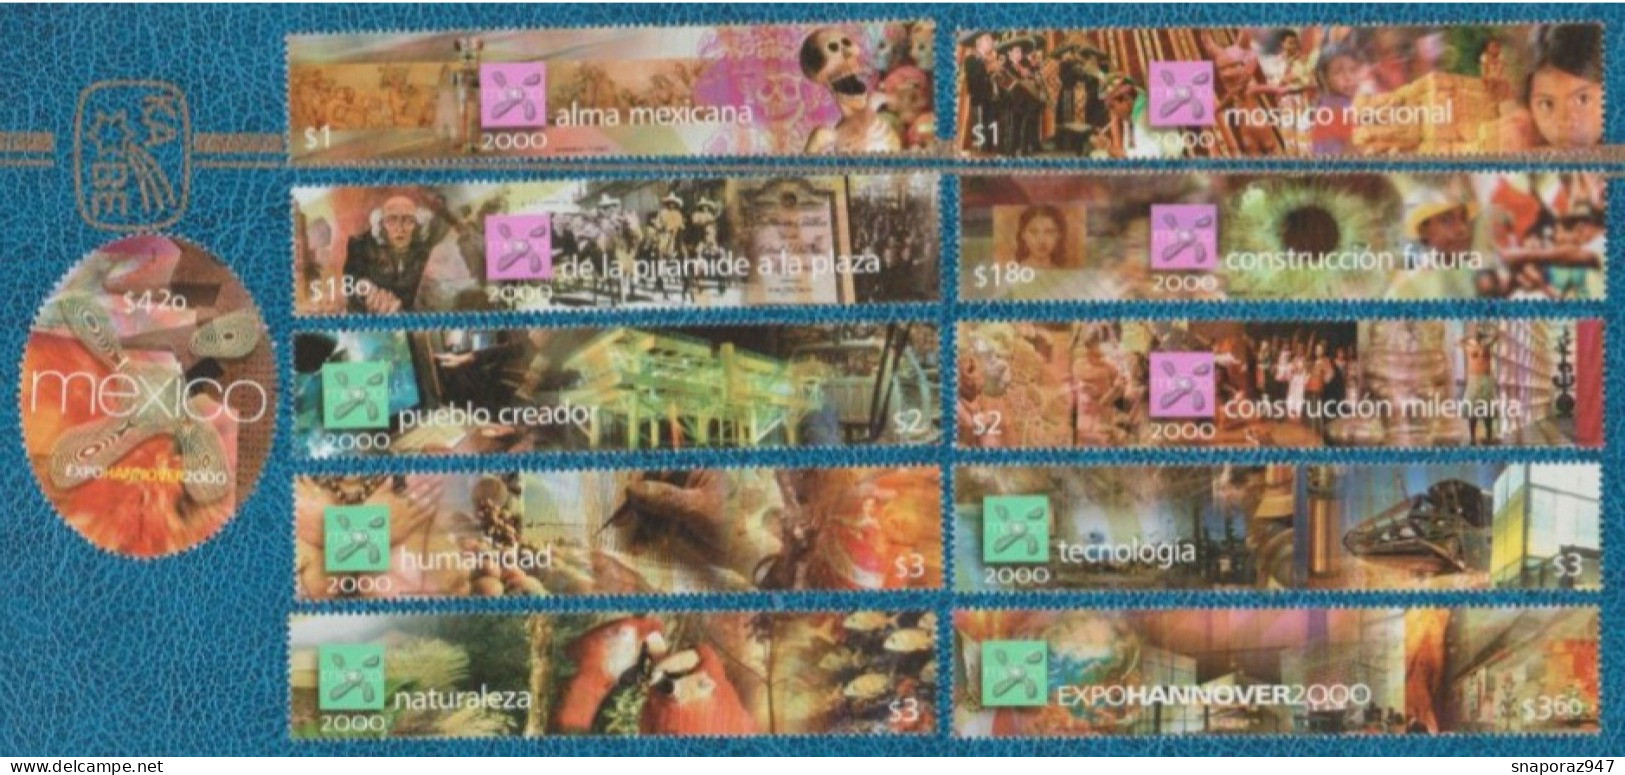 2000 Messico "Expo 2000" Universal Exhibition In Hanover (Block Printed) Set MNH** RX77 - 2000 – Hanovre (Allemagne)